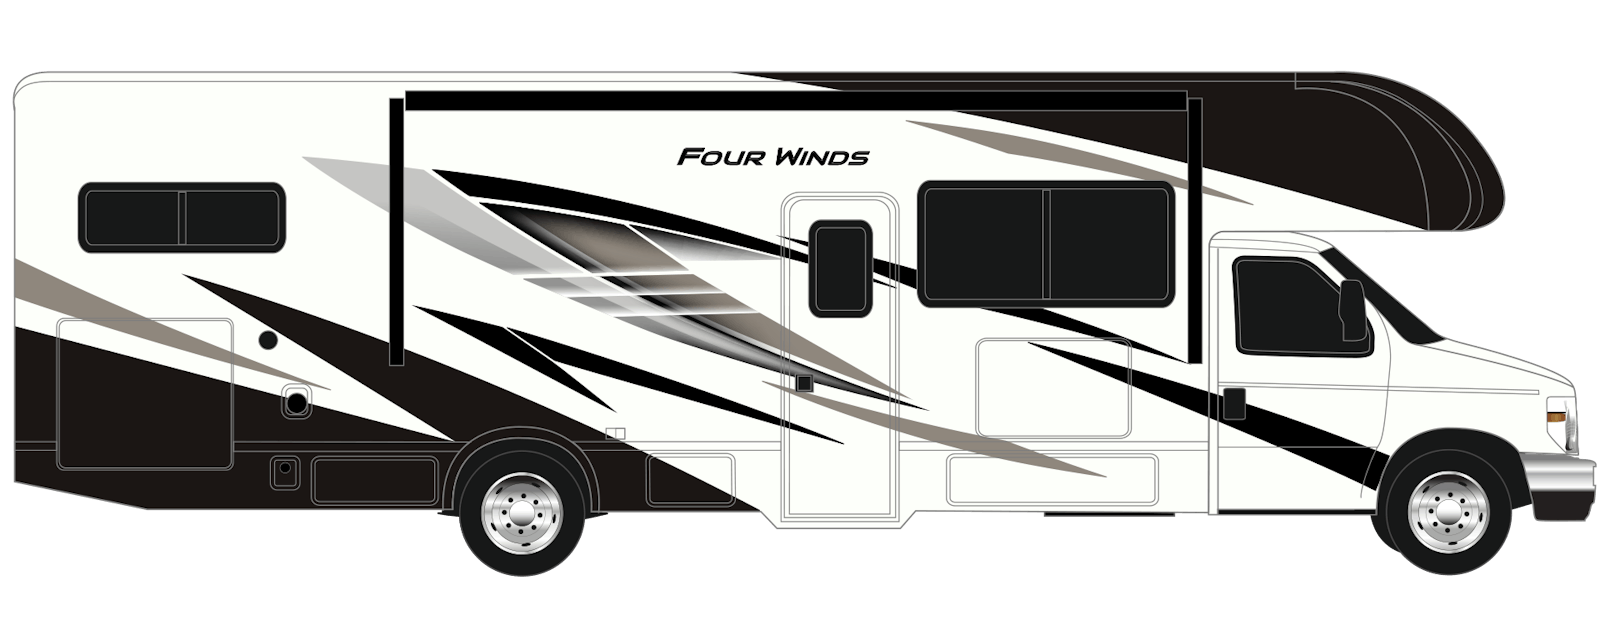 four winds downwind exterior